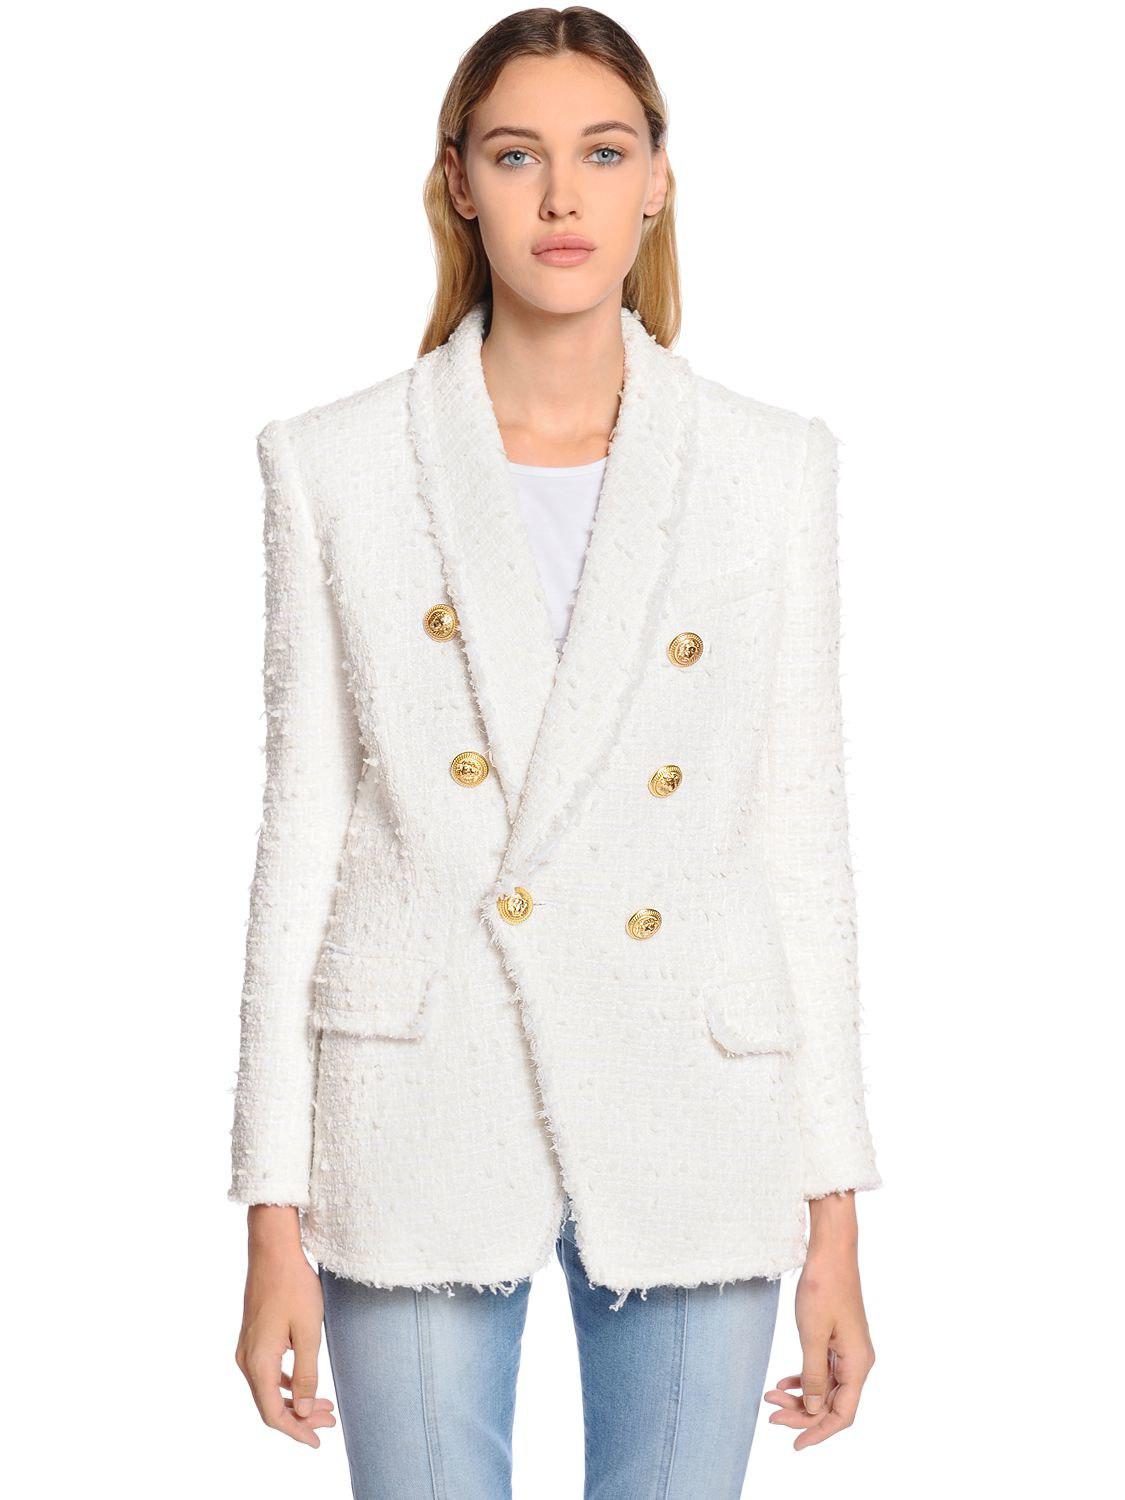 Balmain Double Breasted Fringed Tweed Blazer in White - Lyst